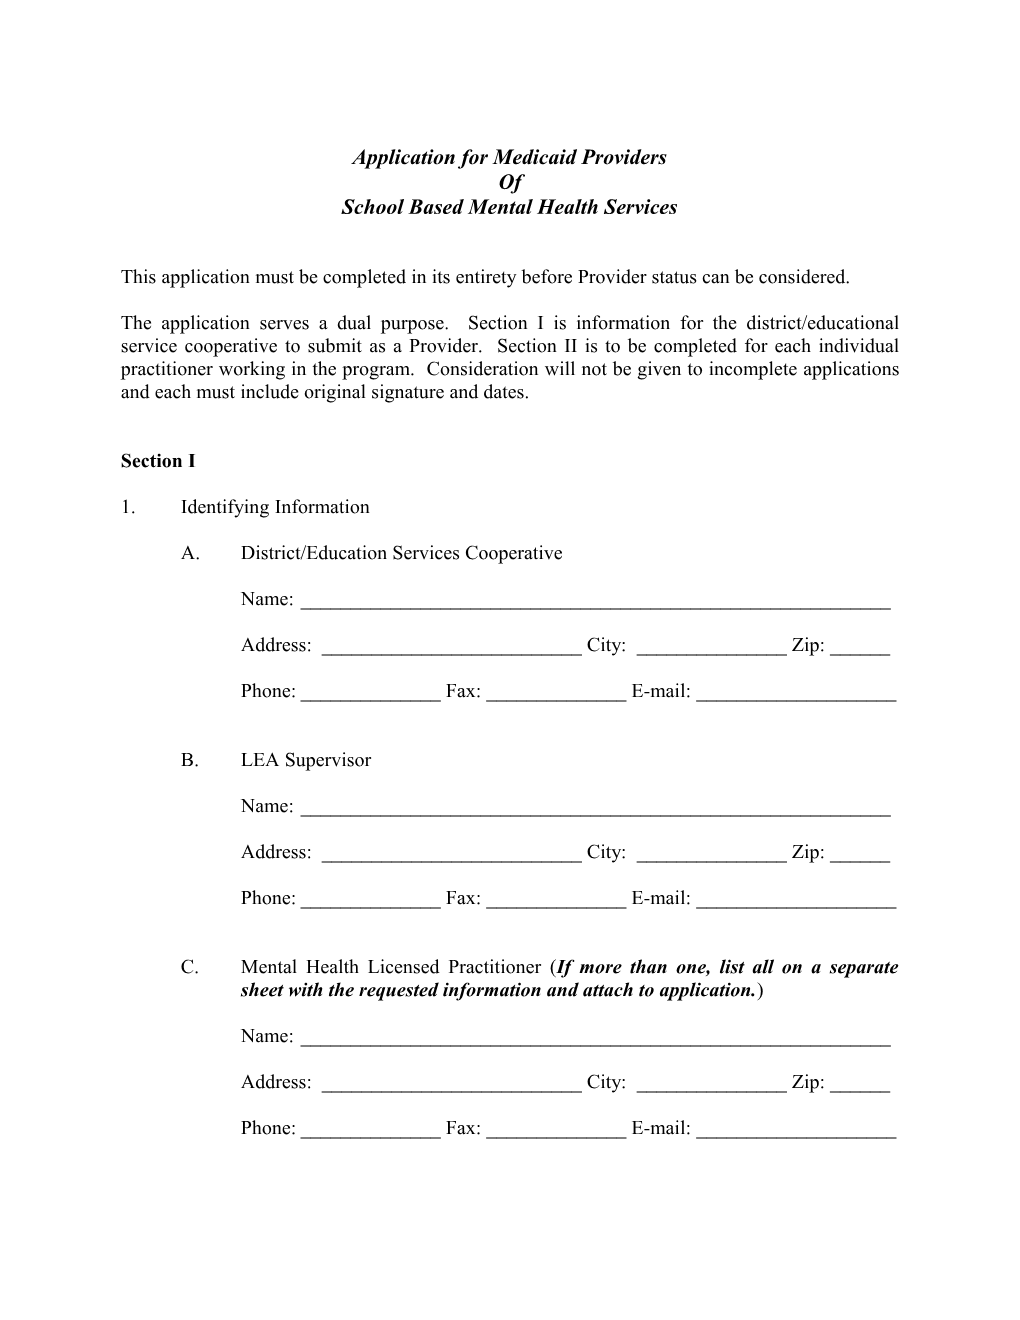 Application for Medicaid Providers